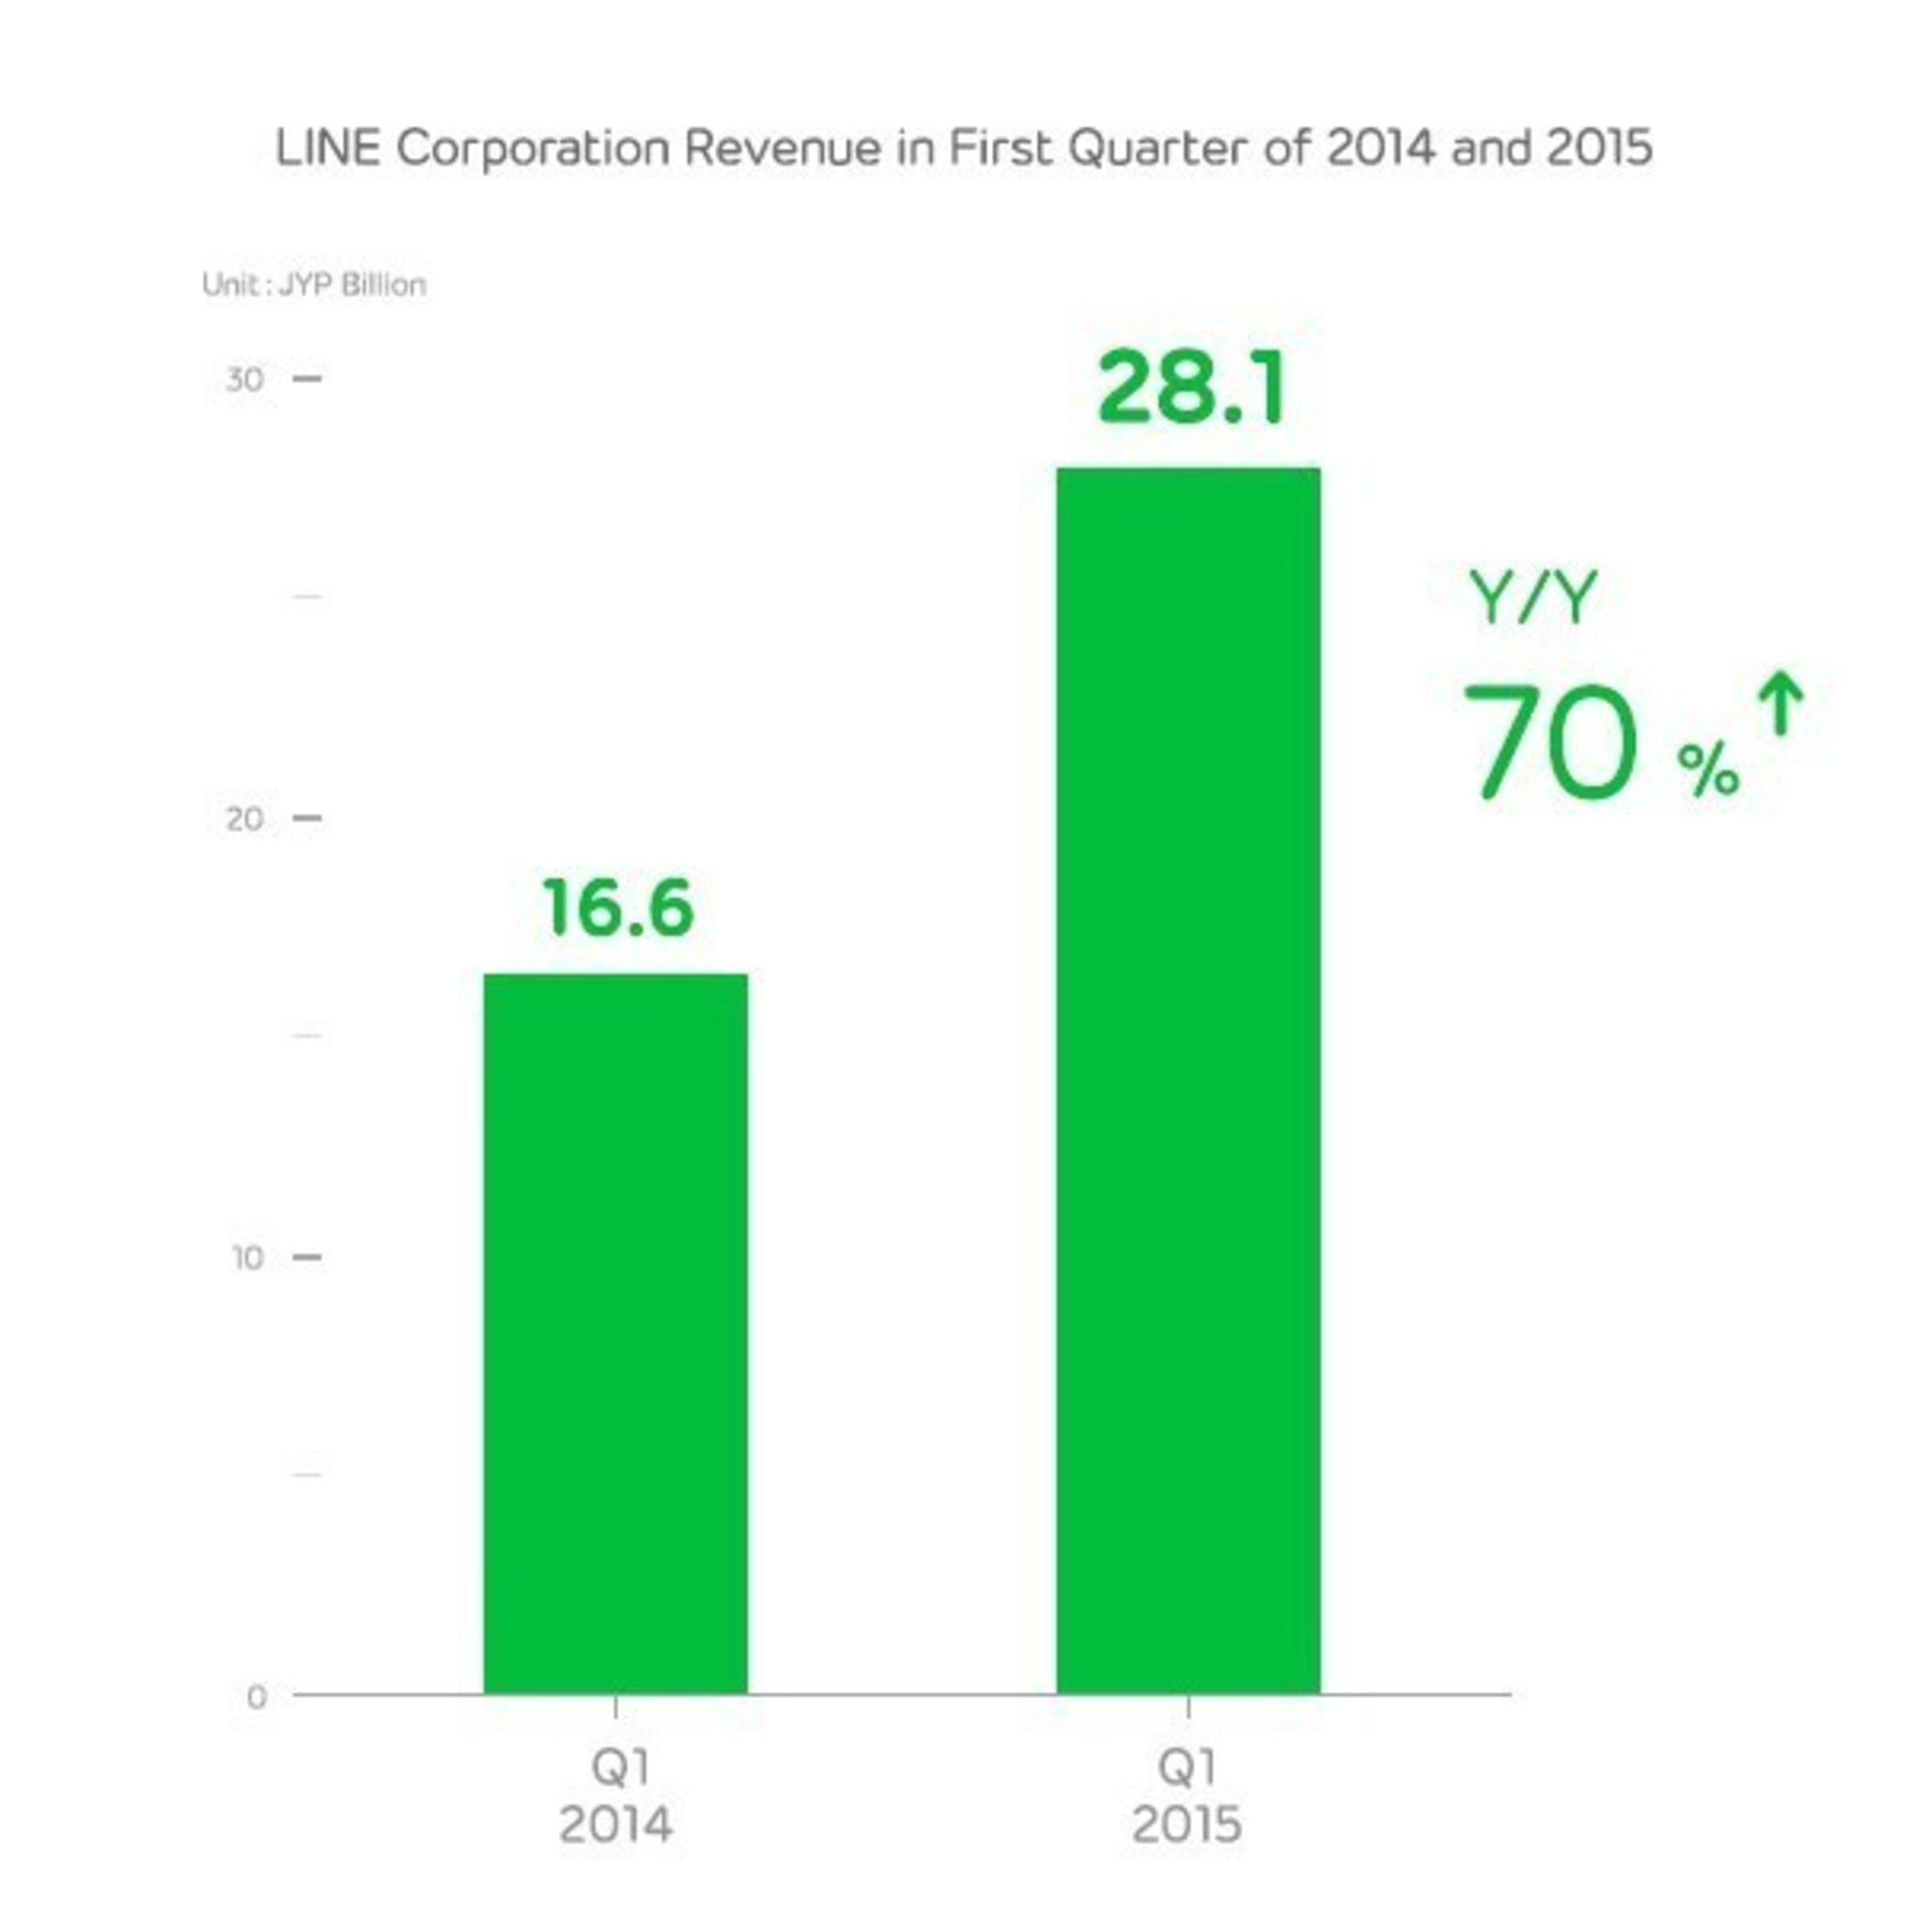 LINE Corporation Revenue in First Quarter of 2014 and 2015